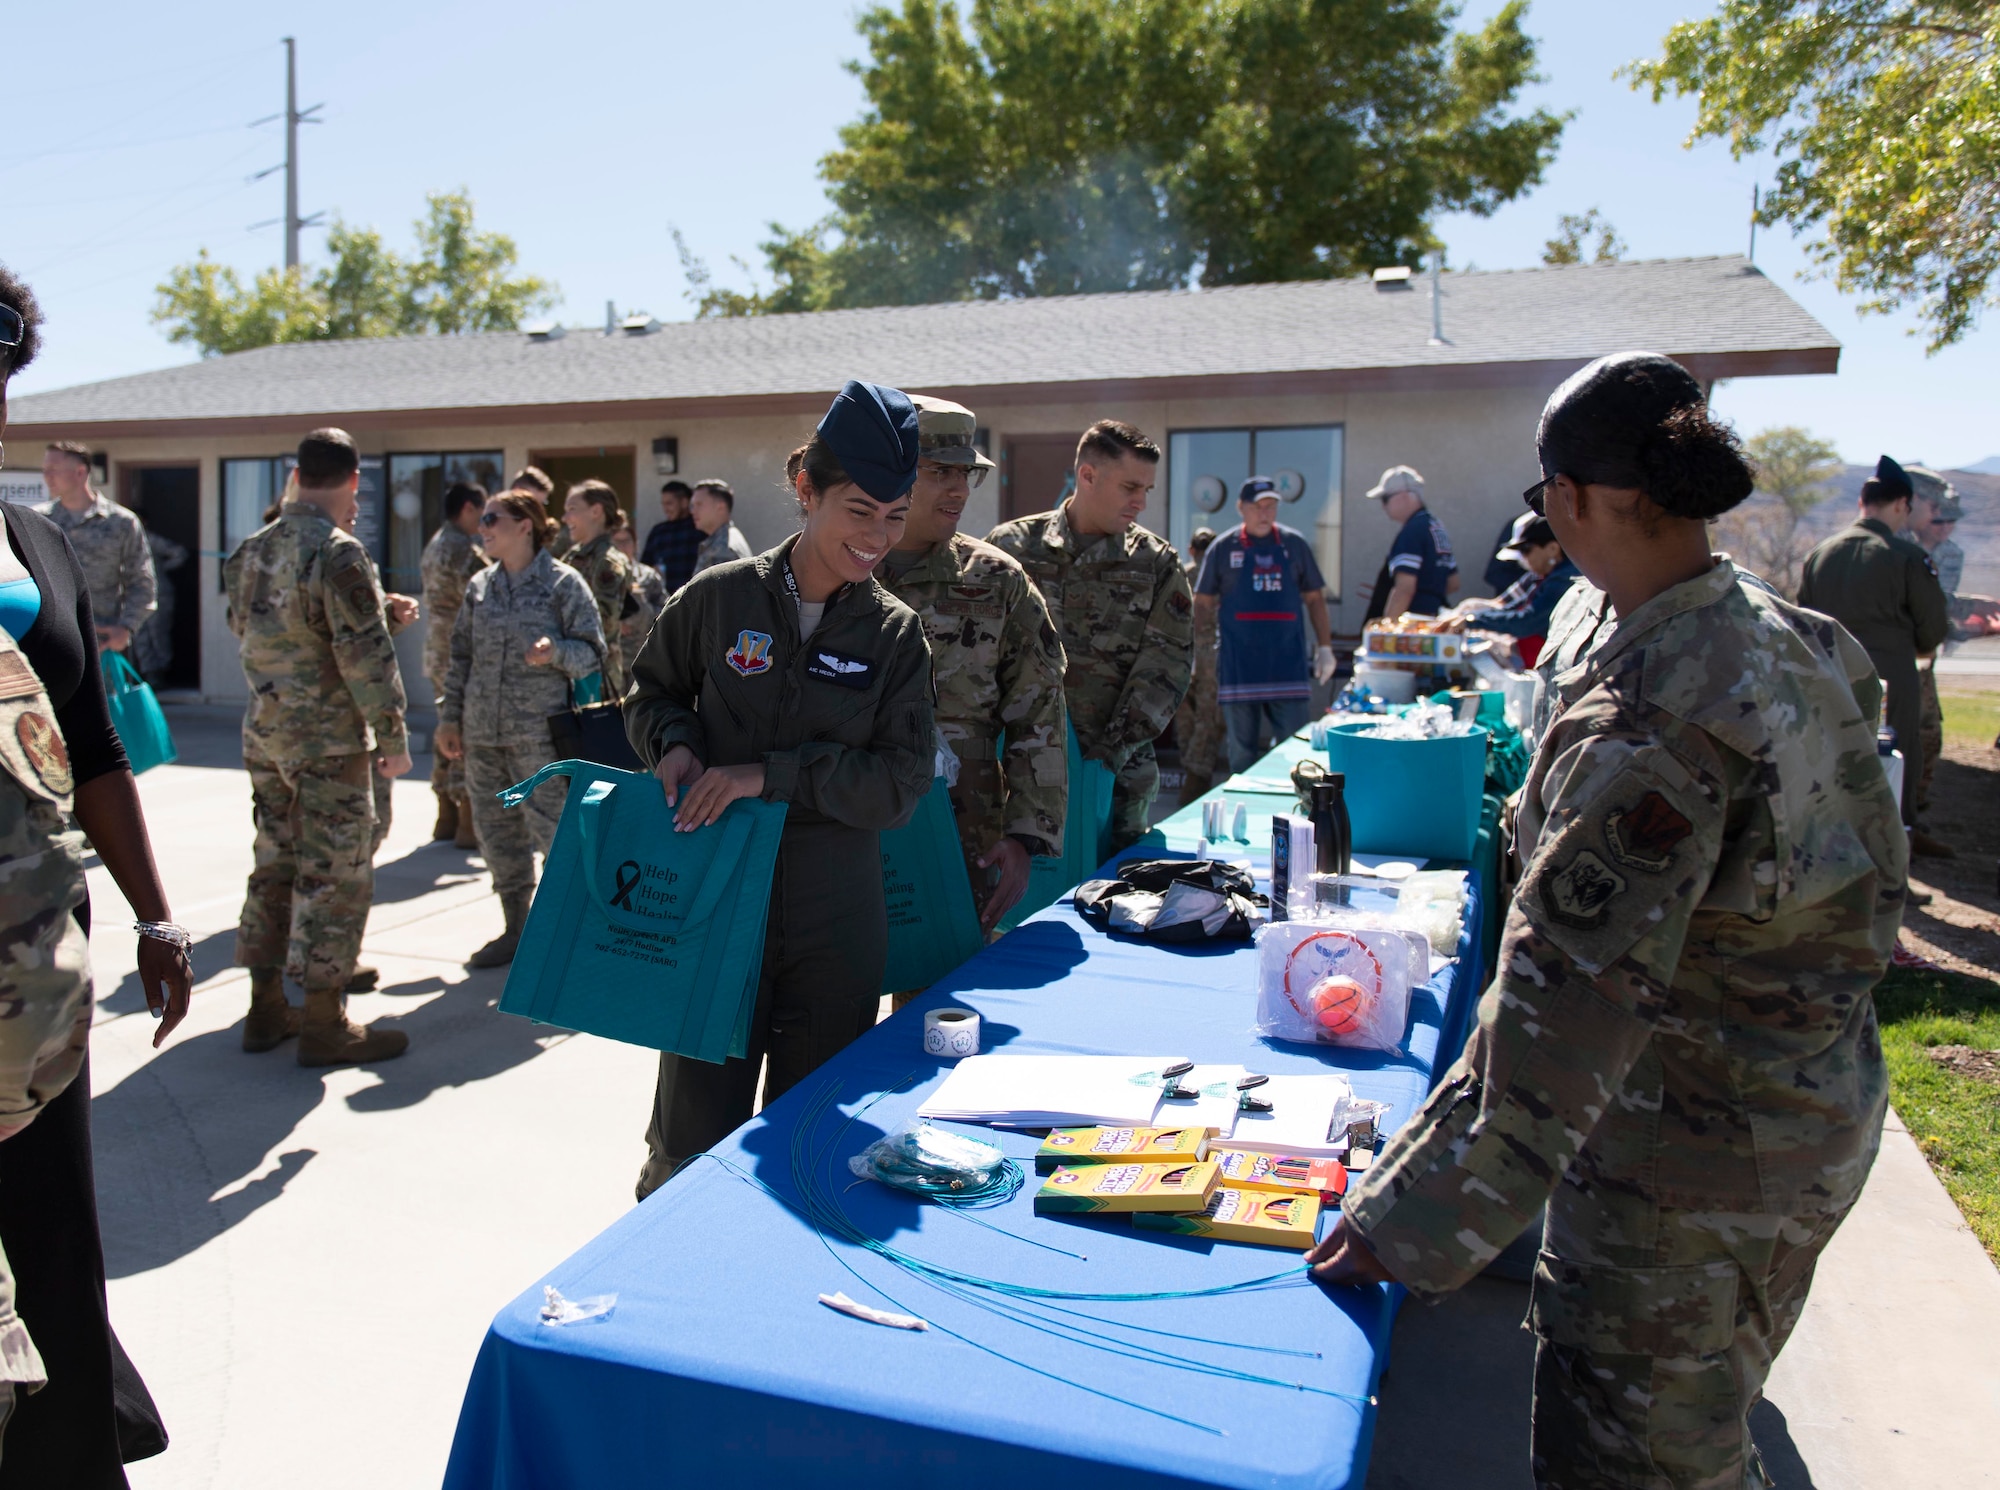 Airmen learn about the resources offered at the opening of the new Sexual Assault Prevention and Response Office, at Creech Air Force Base, Nevada, Sept. 30, 2019. One of the many other benefits of Creech having its own SAPR Office is that Airmen, contractors, and adult dependents won’t have to drive the hour-long commute to the Nellis AFB location. (U.S. Air Force photo by Senior Airman Lauren Silverthorne)